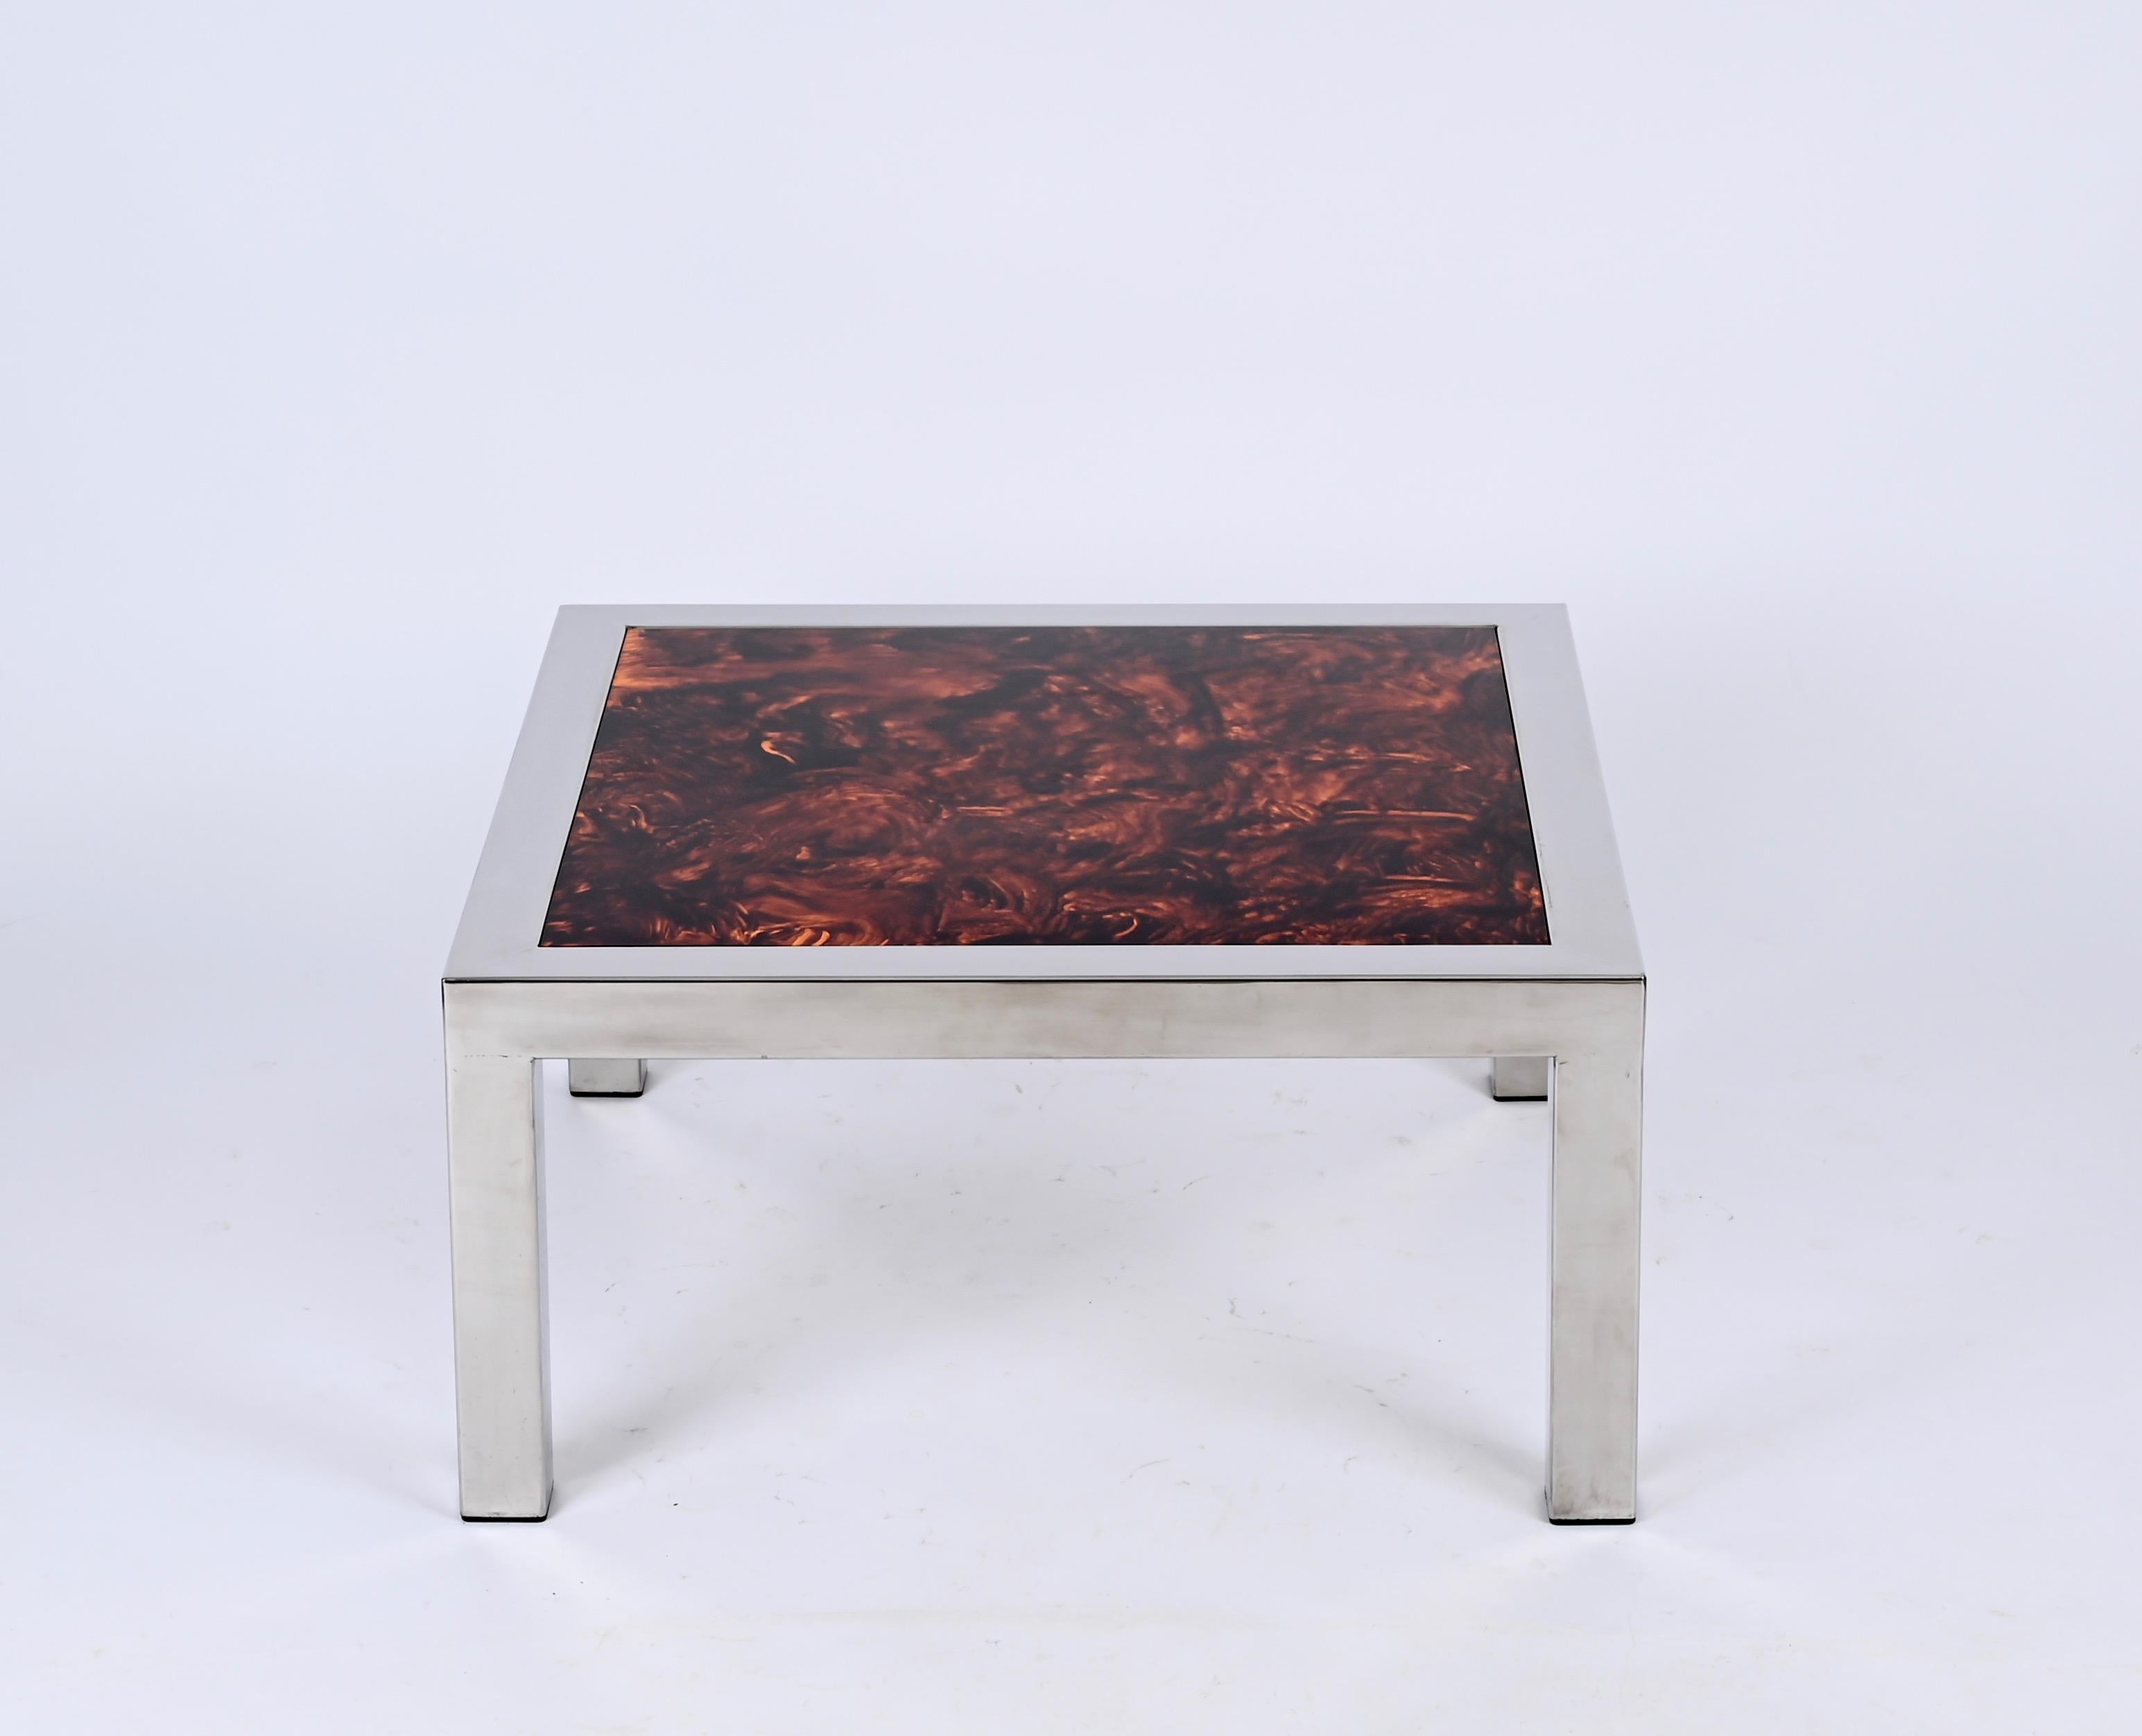 Chromed Steel and Tortoiseshell Effect Lucite Square Coffee Table, Italy 1970s For Sale 1